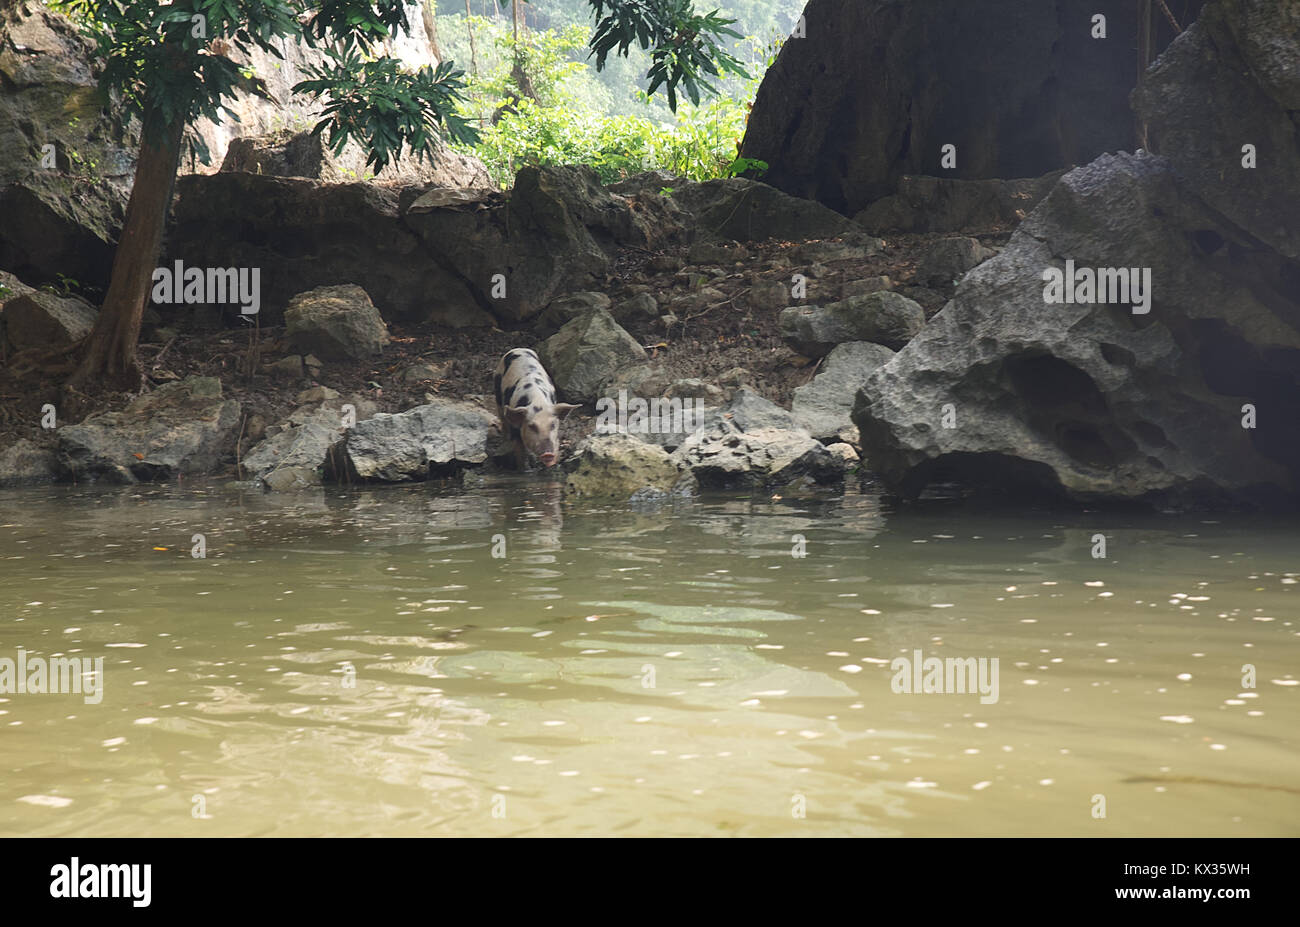 Vietnamese pigs drinking water in the Tam Coc river, Vietnam. Stock Photo